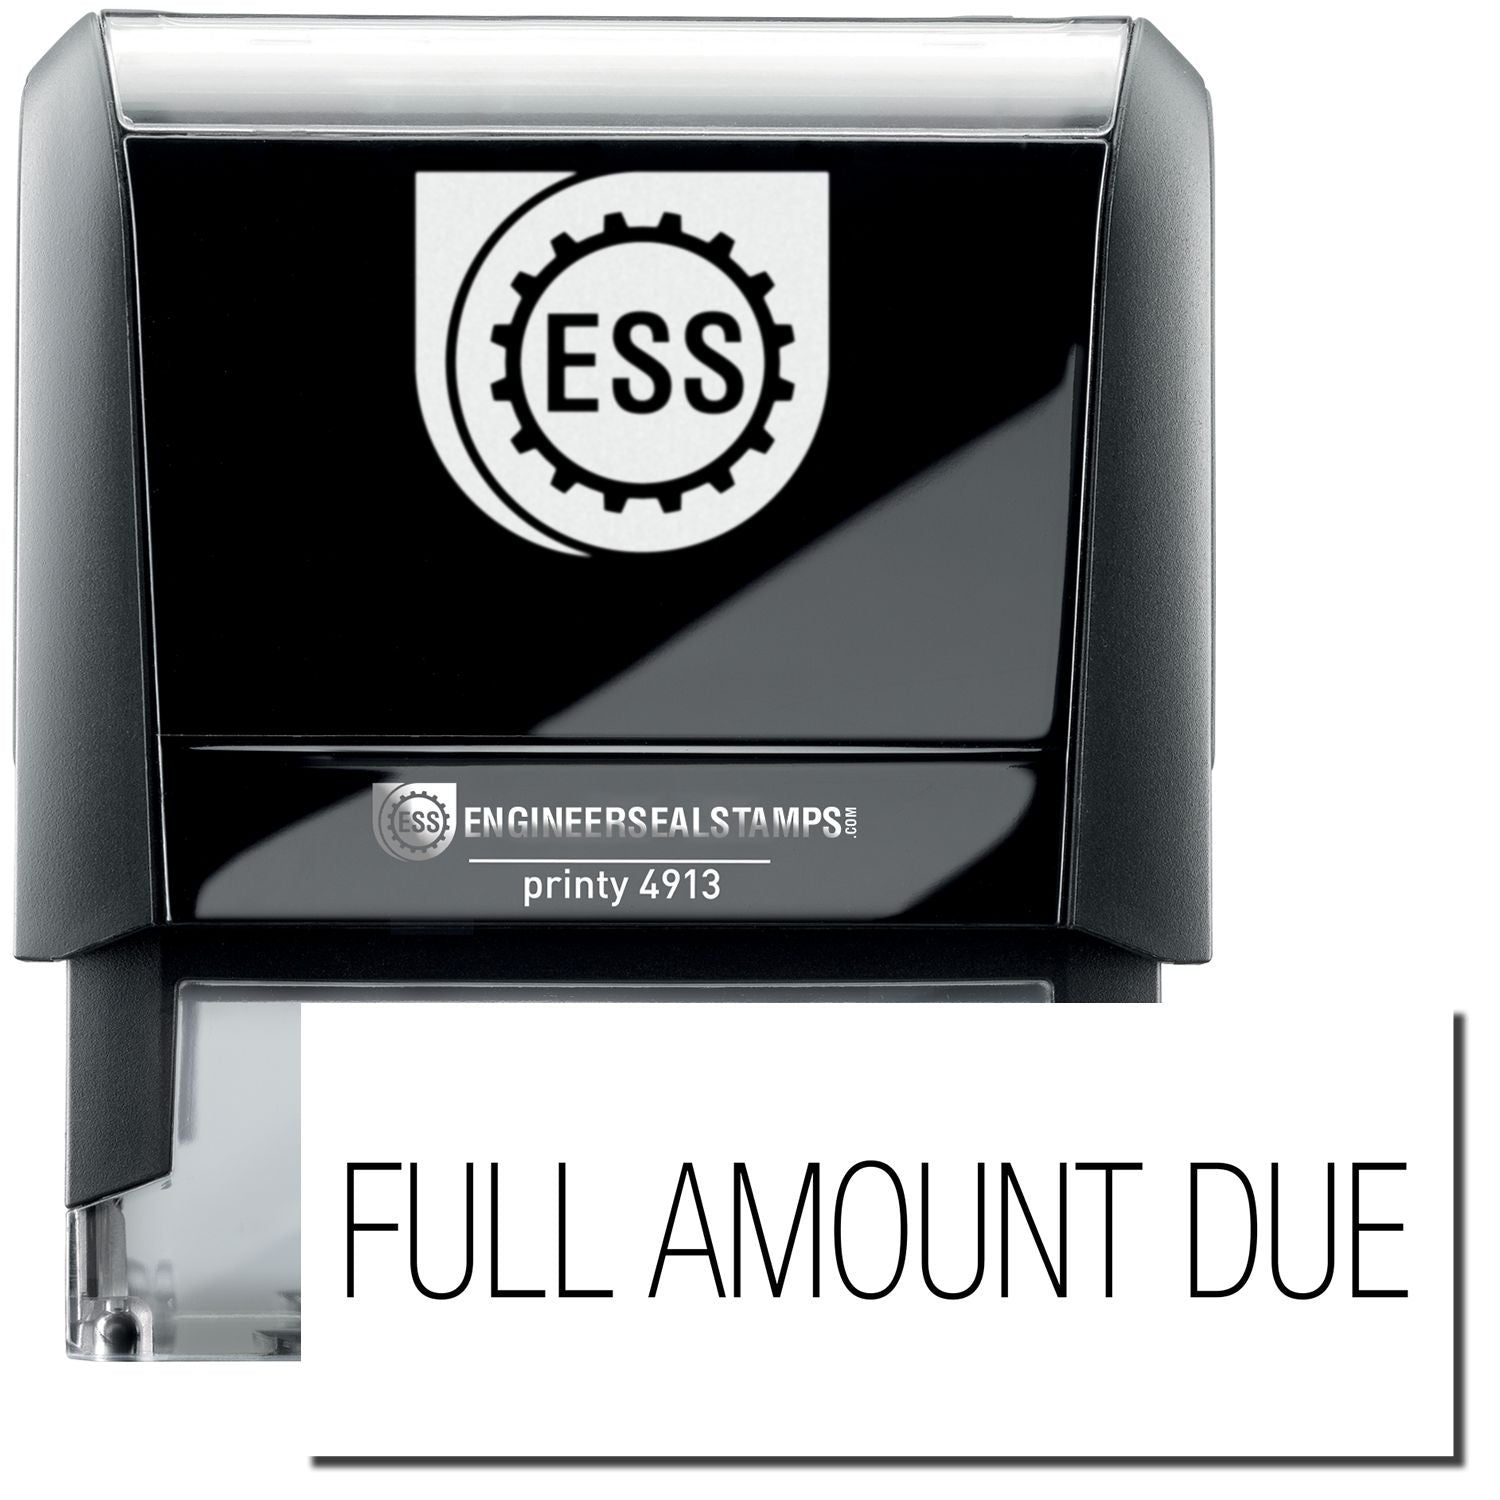 A self-inking stamp with a stamped image showing how the text "FULL AMOUNT DUE" in a large font is displayed by it.